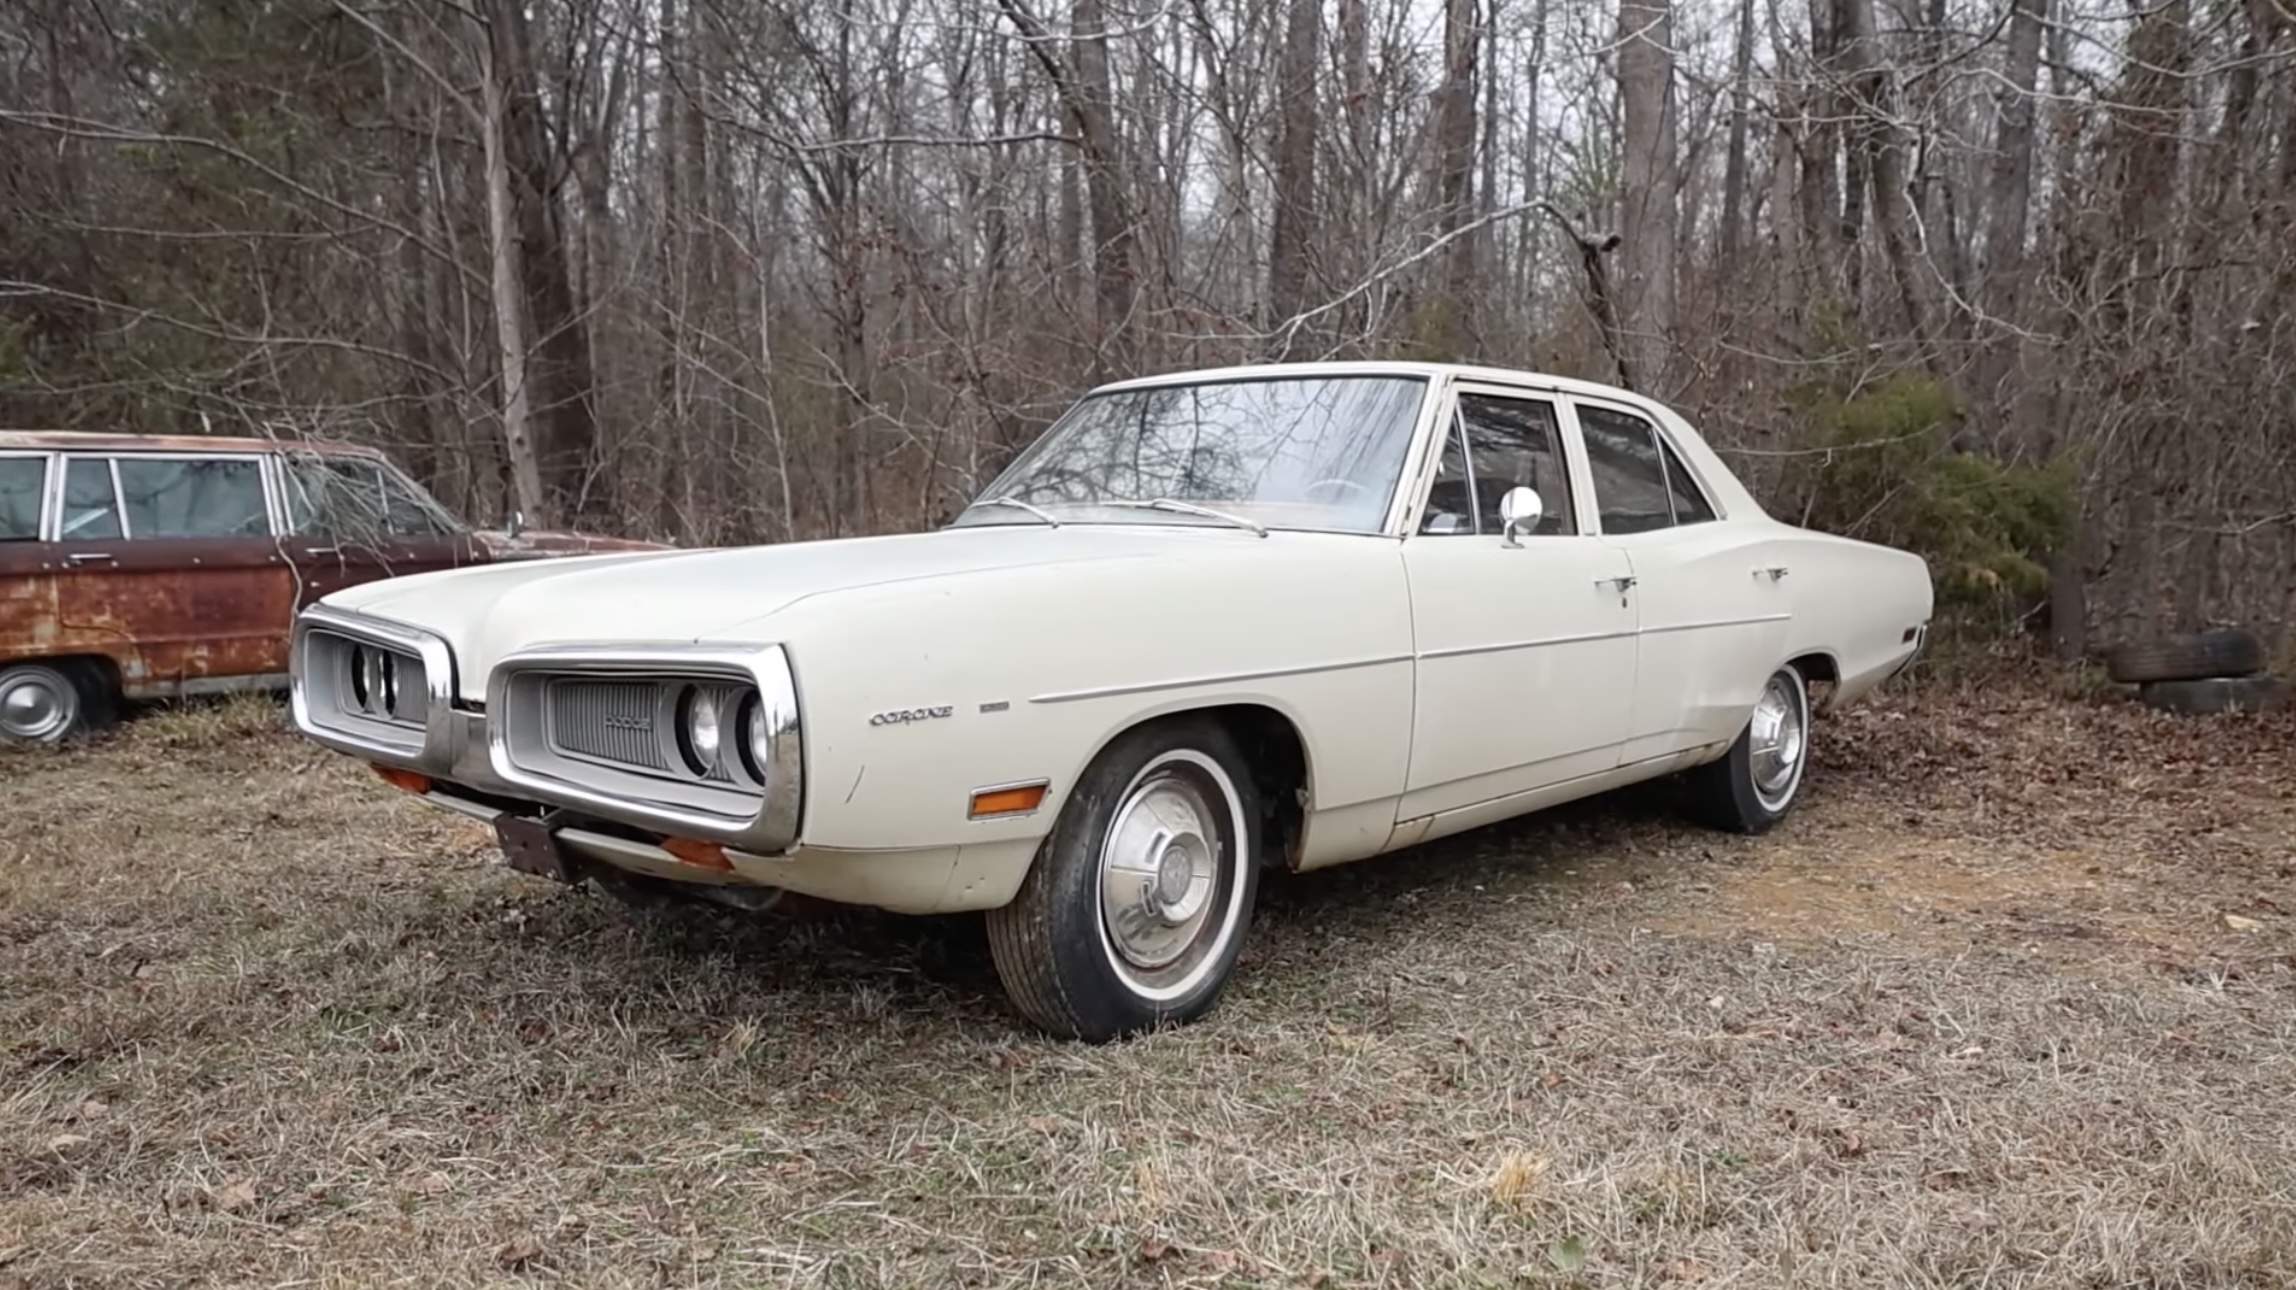 Not Muscle: This Basic Dodge Coronet Comes Back To Life